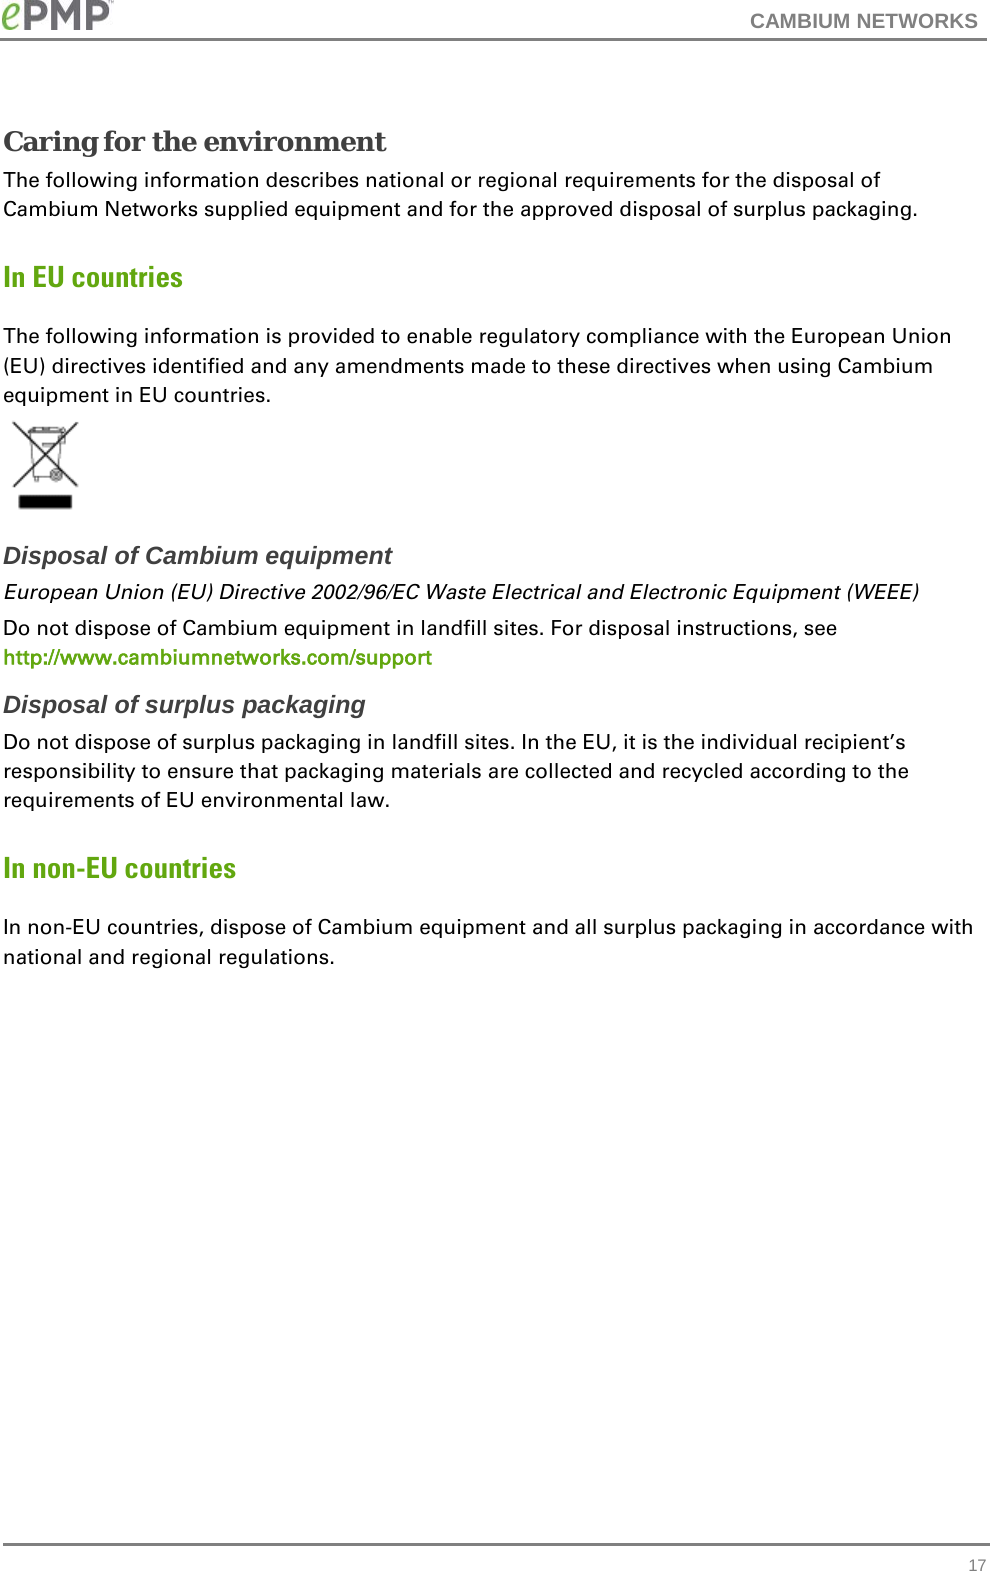 CAMBIUM NETWORKS  Caring for the environment The following information describes national or regional requirements for the disposal of Cambium Networks supplied equipment and for the approved disposal of surplus packaging. In EU countries The following information is provided to enable regulatory compliance with the European Union (EU) directives identified and any amendments made to these directives when using Cambium equipment in EU countries.  Disposal of Cambium equipment European Union (EU) Directive 2002/96/EC Waste Electrical and Electronic Equipment (WEEE) Do not dispose of Cambium equipment in landfill sites. For disposal instructions, see http://www.cambiumnetworks.com/support Disposal of surplus packaging Do not dispose of surplus packaging in landfill sites. In the EU, it is the individual recipient’s responsibility to ensure that packaging materials are collected and recycled according to the requirements of EU environmental law. In non-EU countries In non-EU countries, dispose of Cambium equipment and all surplus packaging in accordance with national and regional regulations.    17 